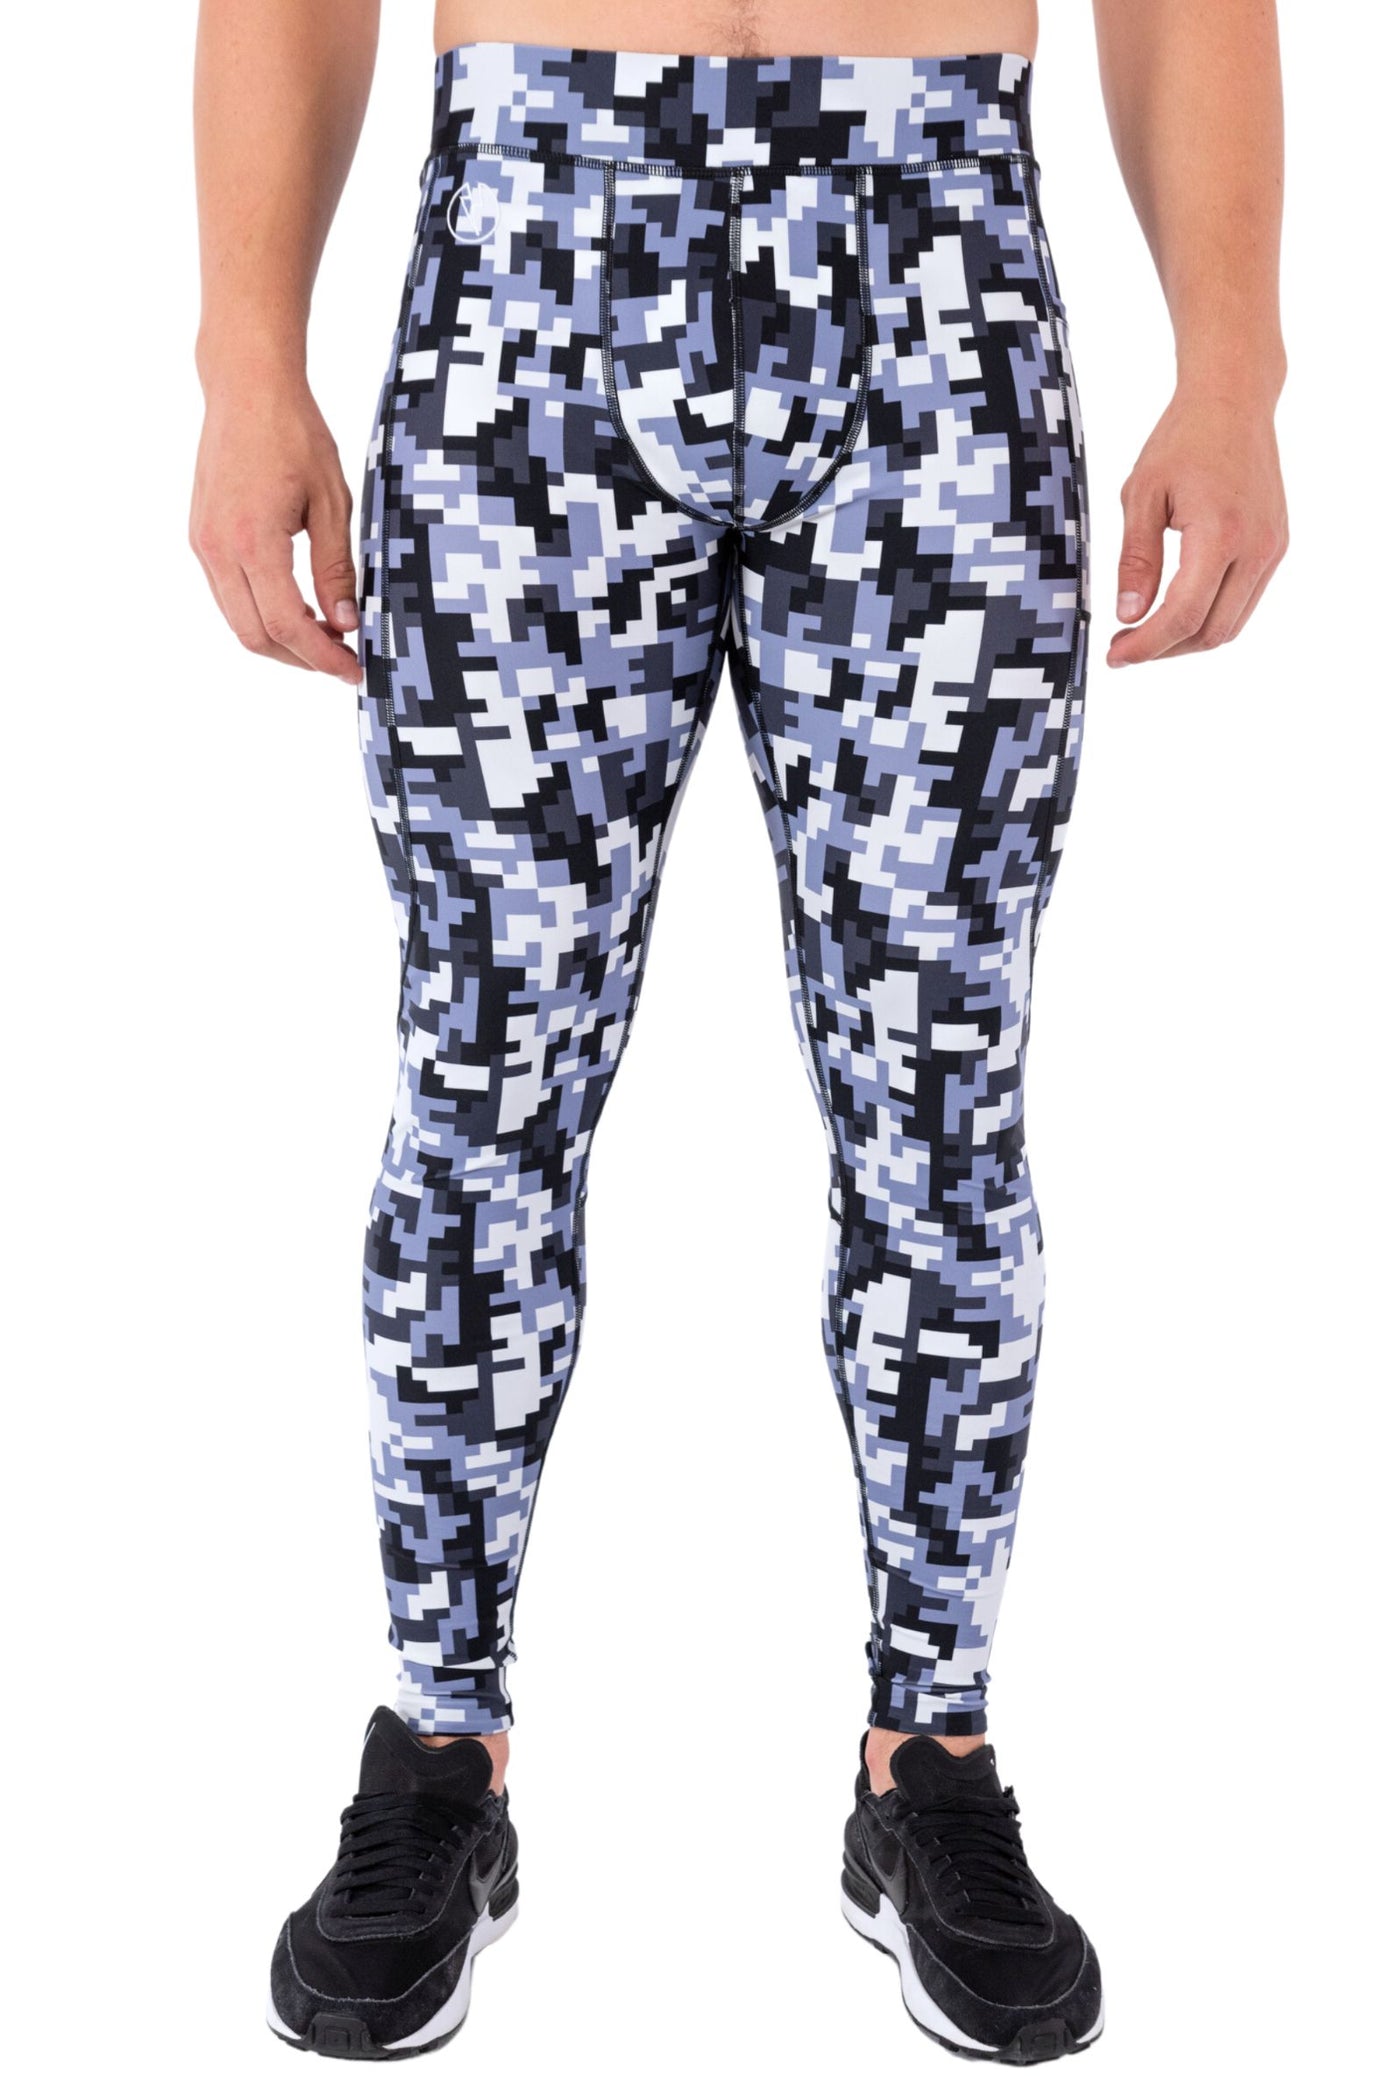 Cyber Camo Meggings with Removable Crotch Pad - Kapow Meggings